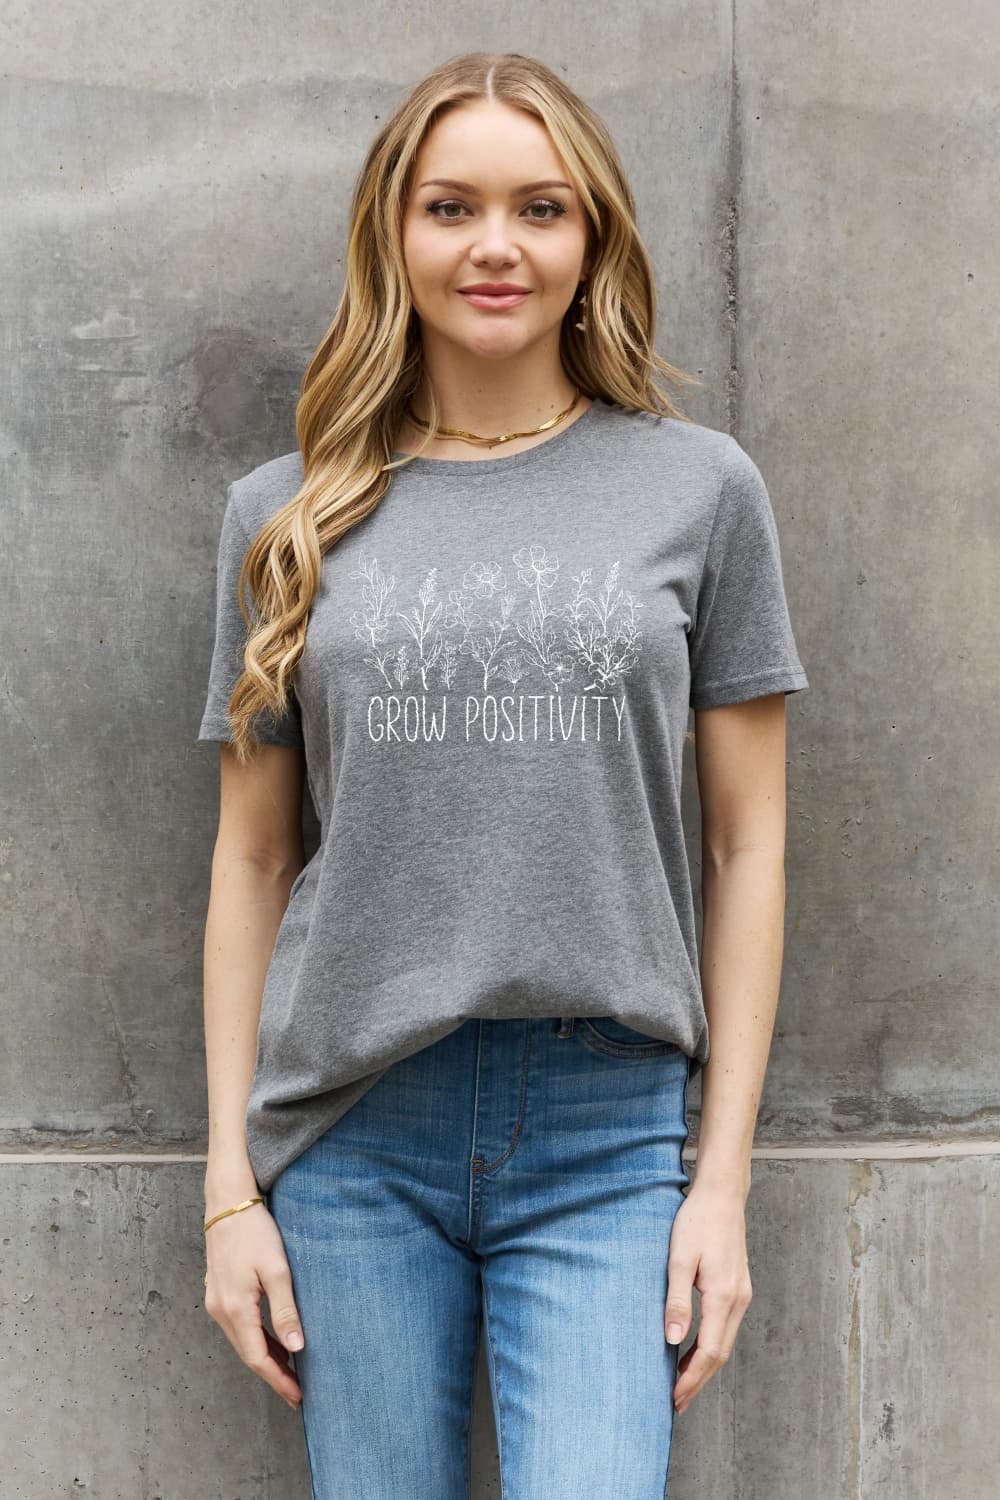 Simply Love GROW POSITIVITY Graphic Cotton Tee-TOPS / DRESSES-[Adult]-[Female]-Mid Gray-S-2022 Online Blue Zone Planet